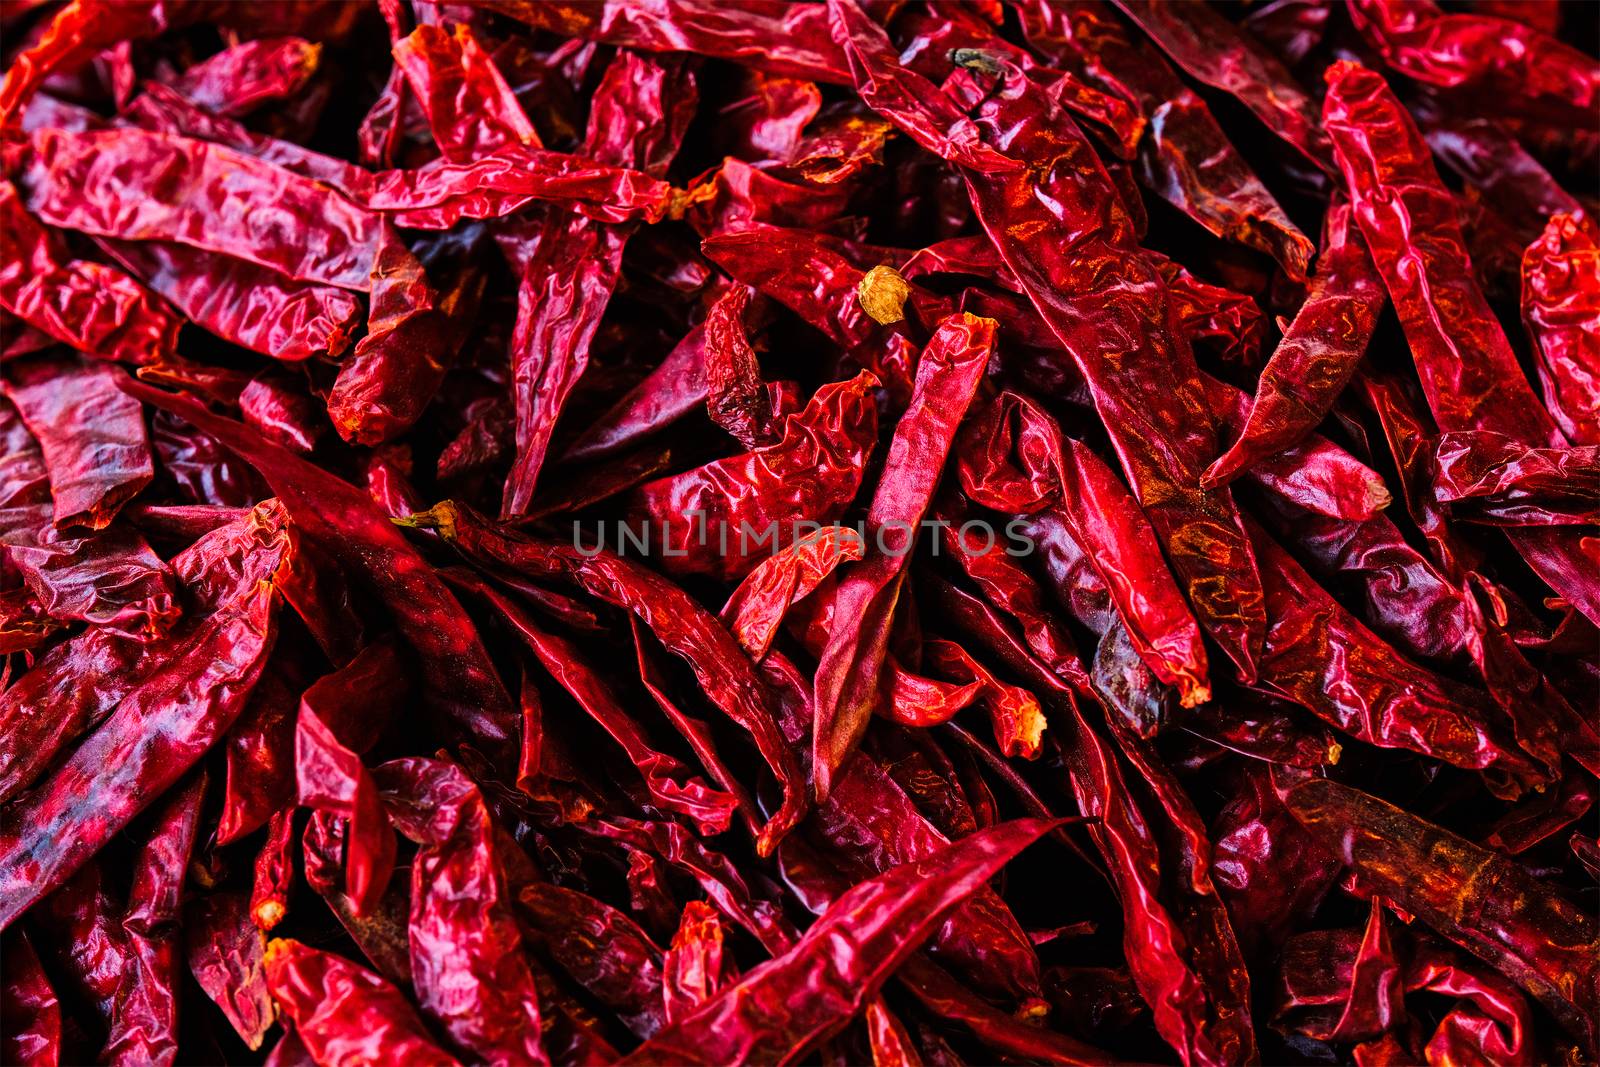 Red spicy chili peppers by dimol